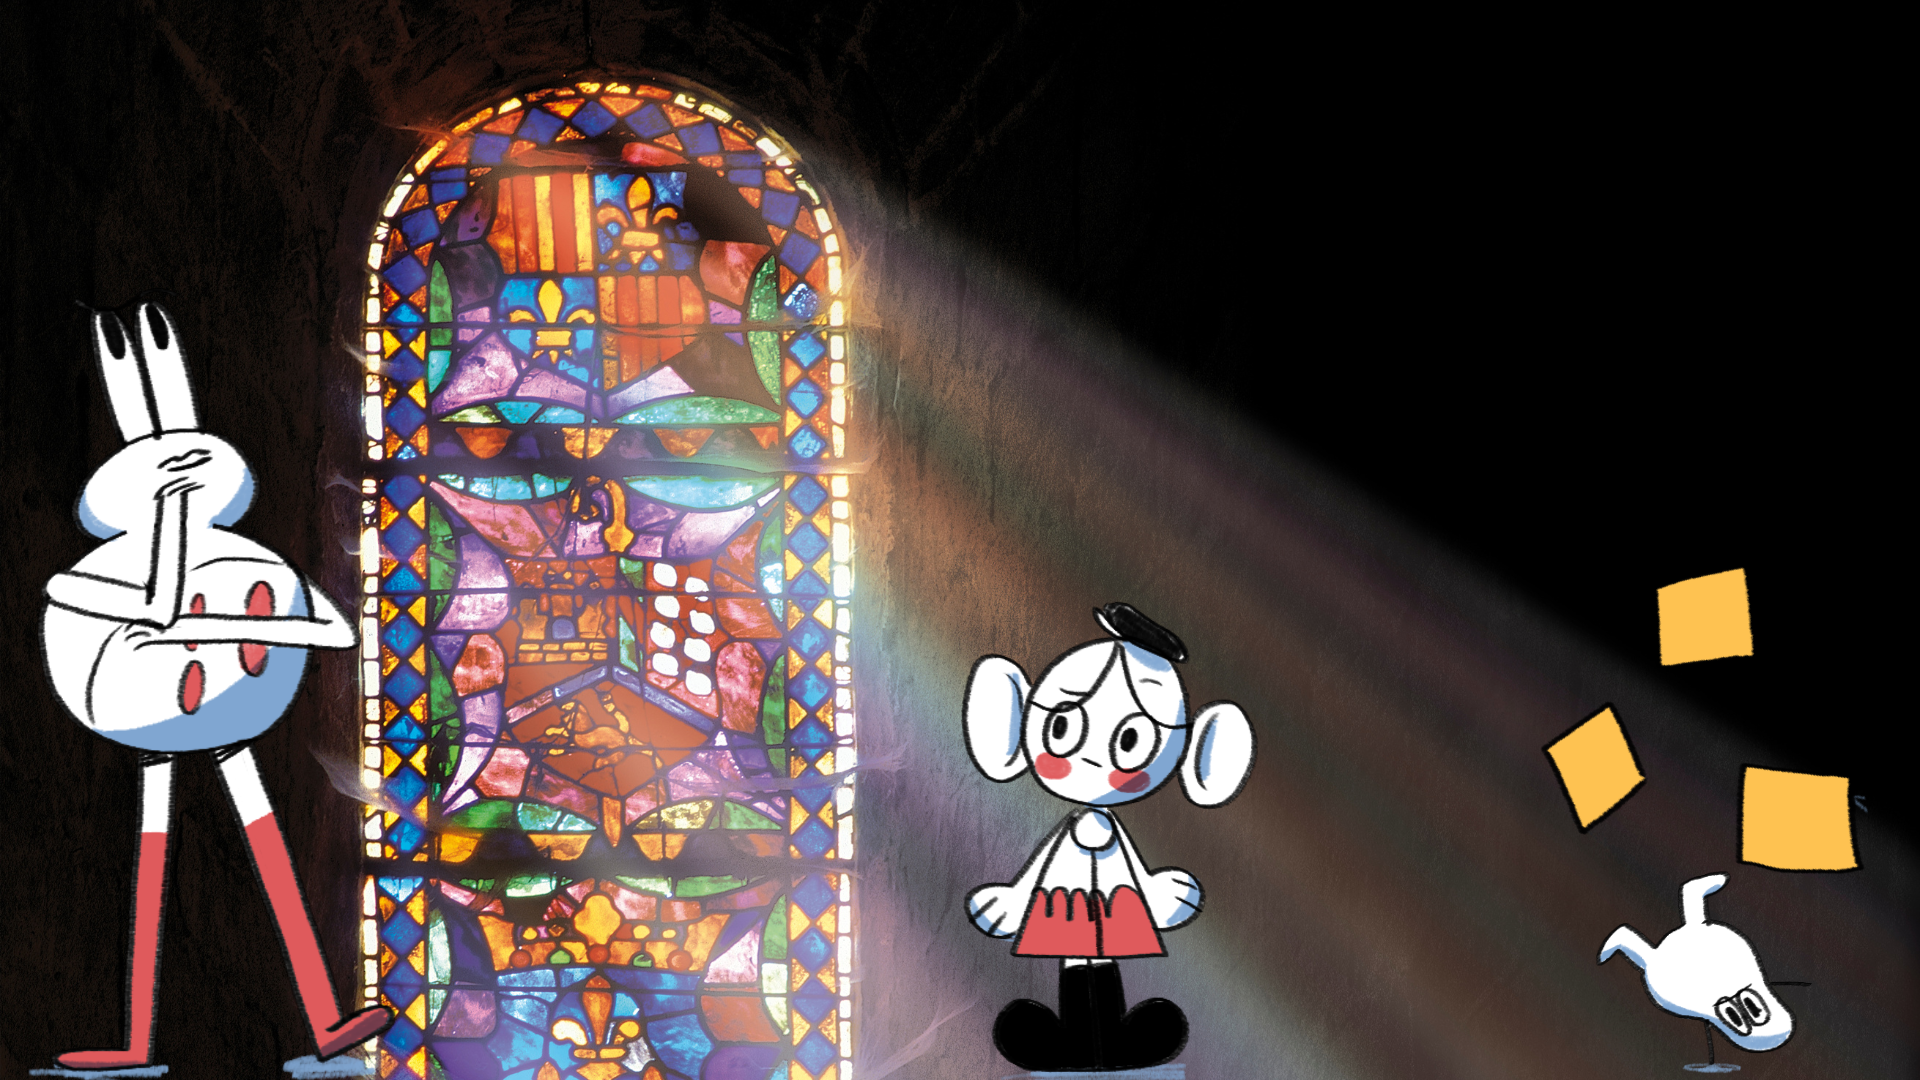 Stained glass window with rays of light shining through into a dark room. Pip cartoon characters are in the foreground, thinking up ideas.